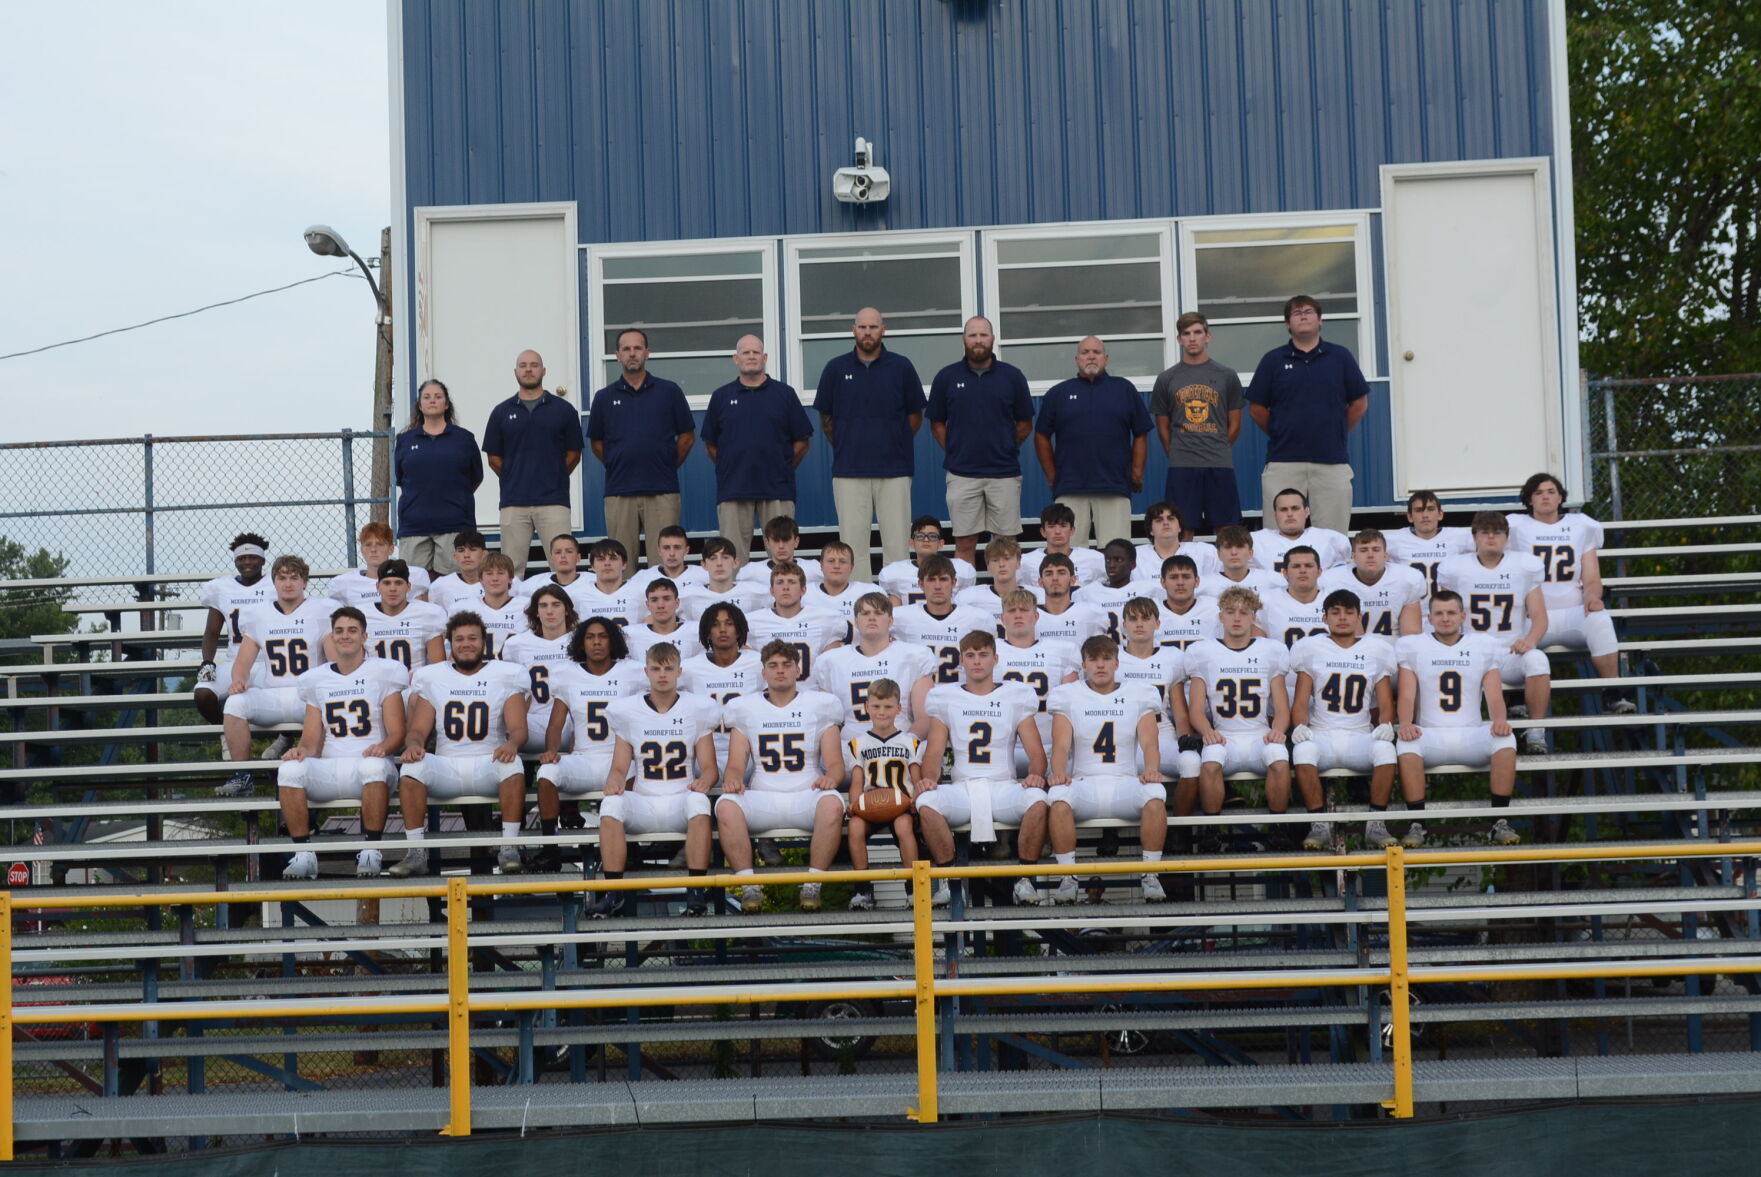 Moorefield Yellow Jackets: Looking to Bounce Back from a 3-7 Season